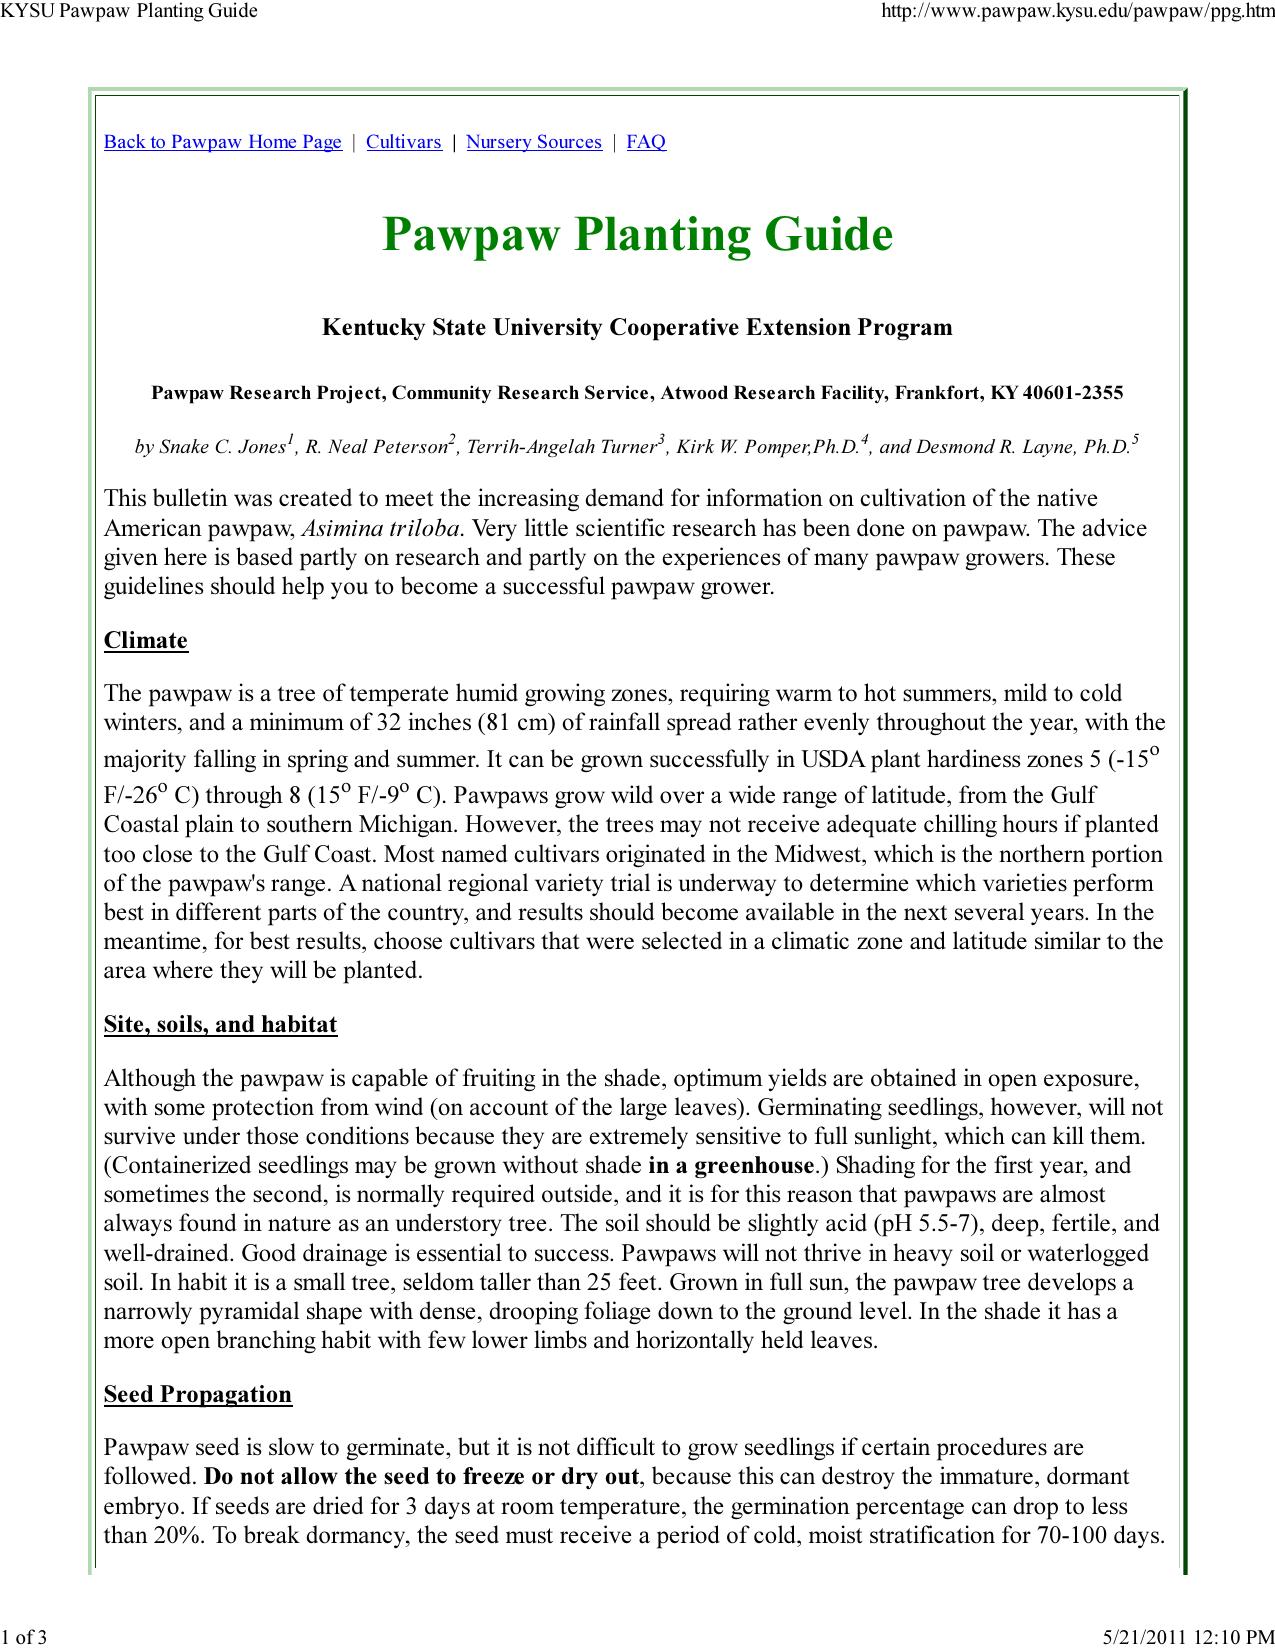 Pawpaw Planting Guide by KSUCEP